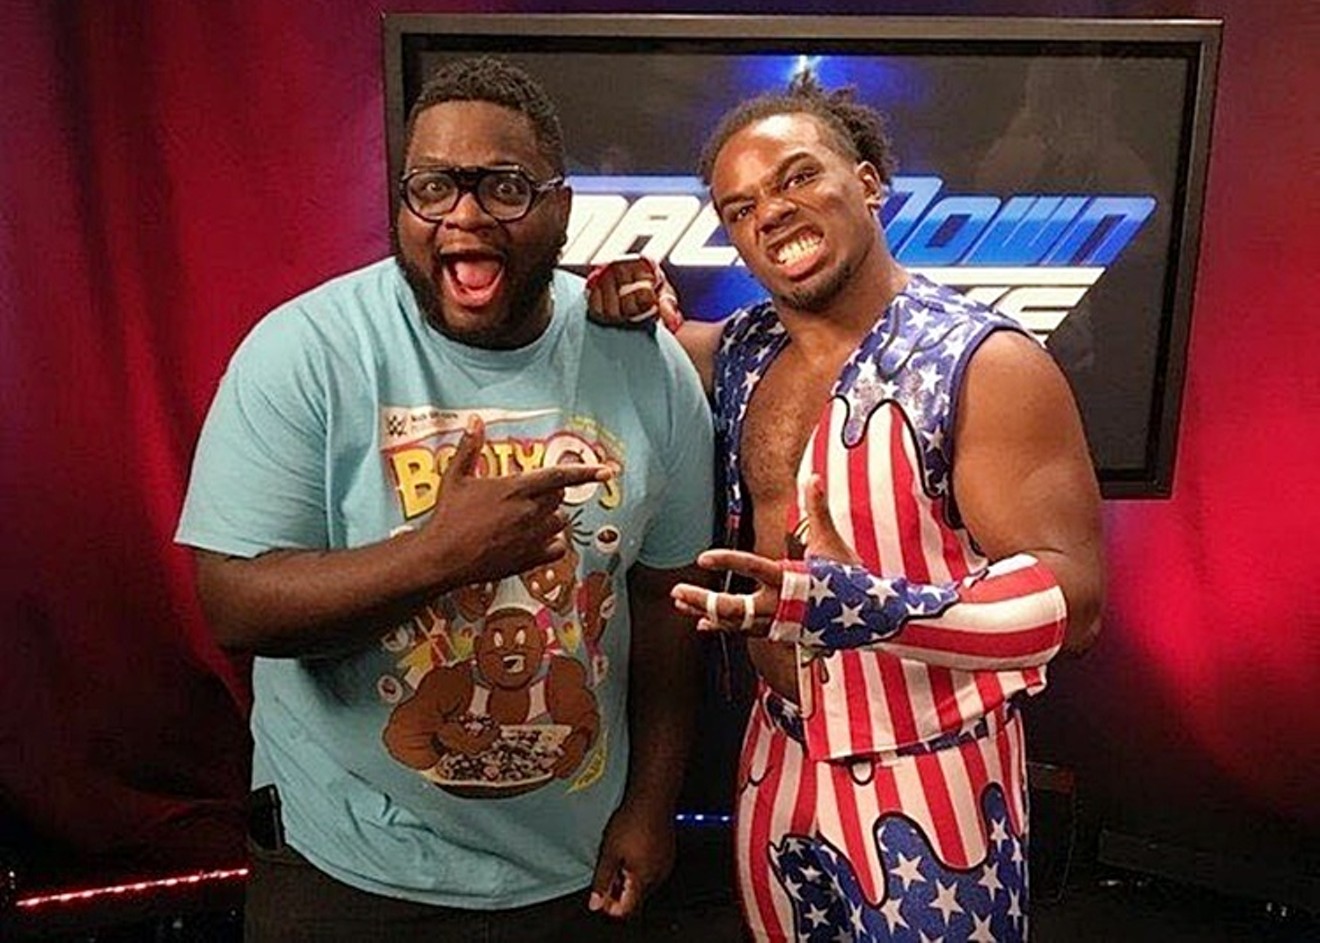 Mega Ran (left) with WWE superstar Xavier Woods (right) backstage at an episode of SmackDown in 2017.